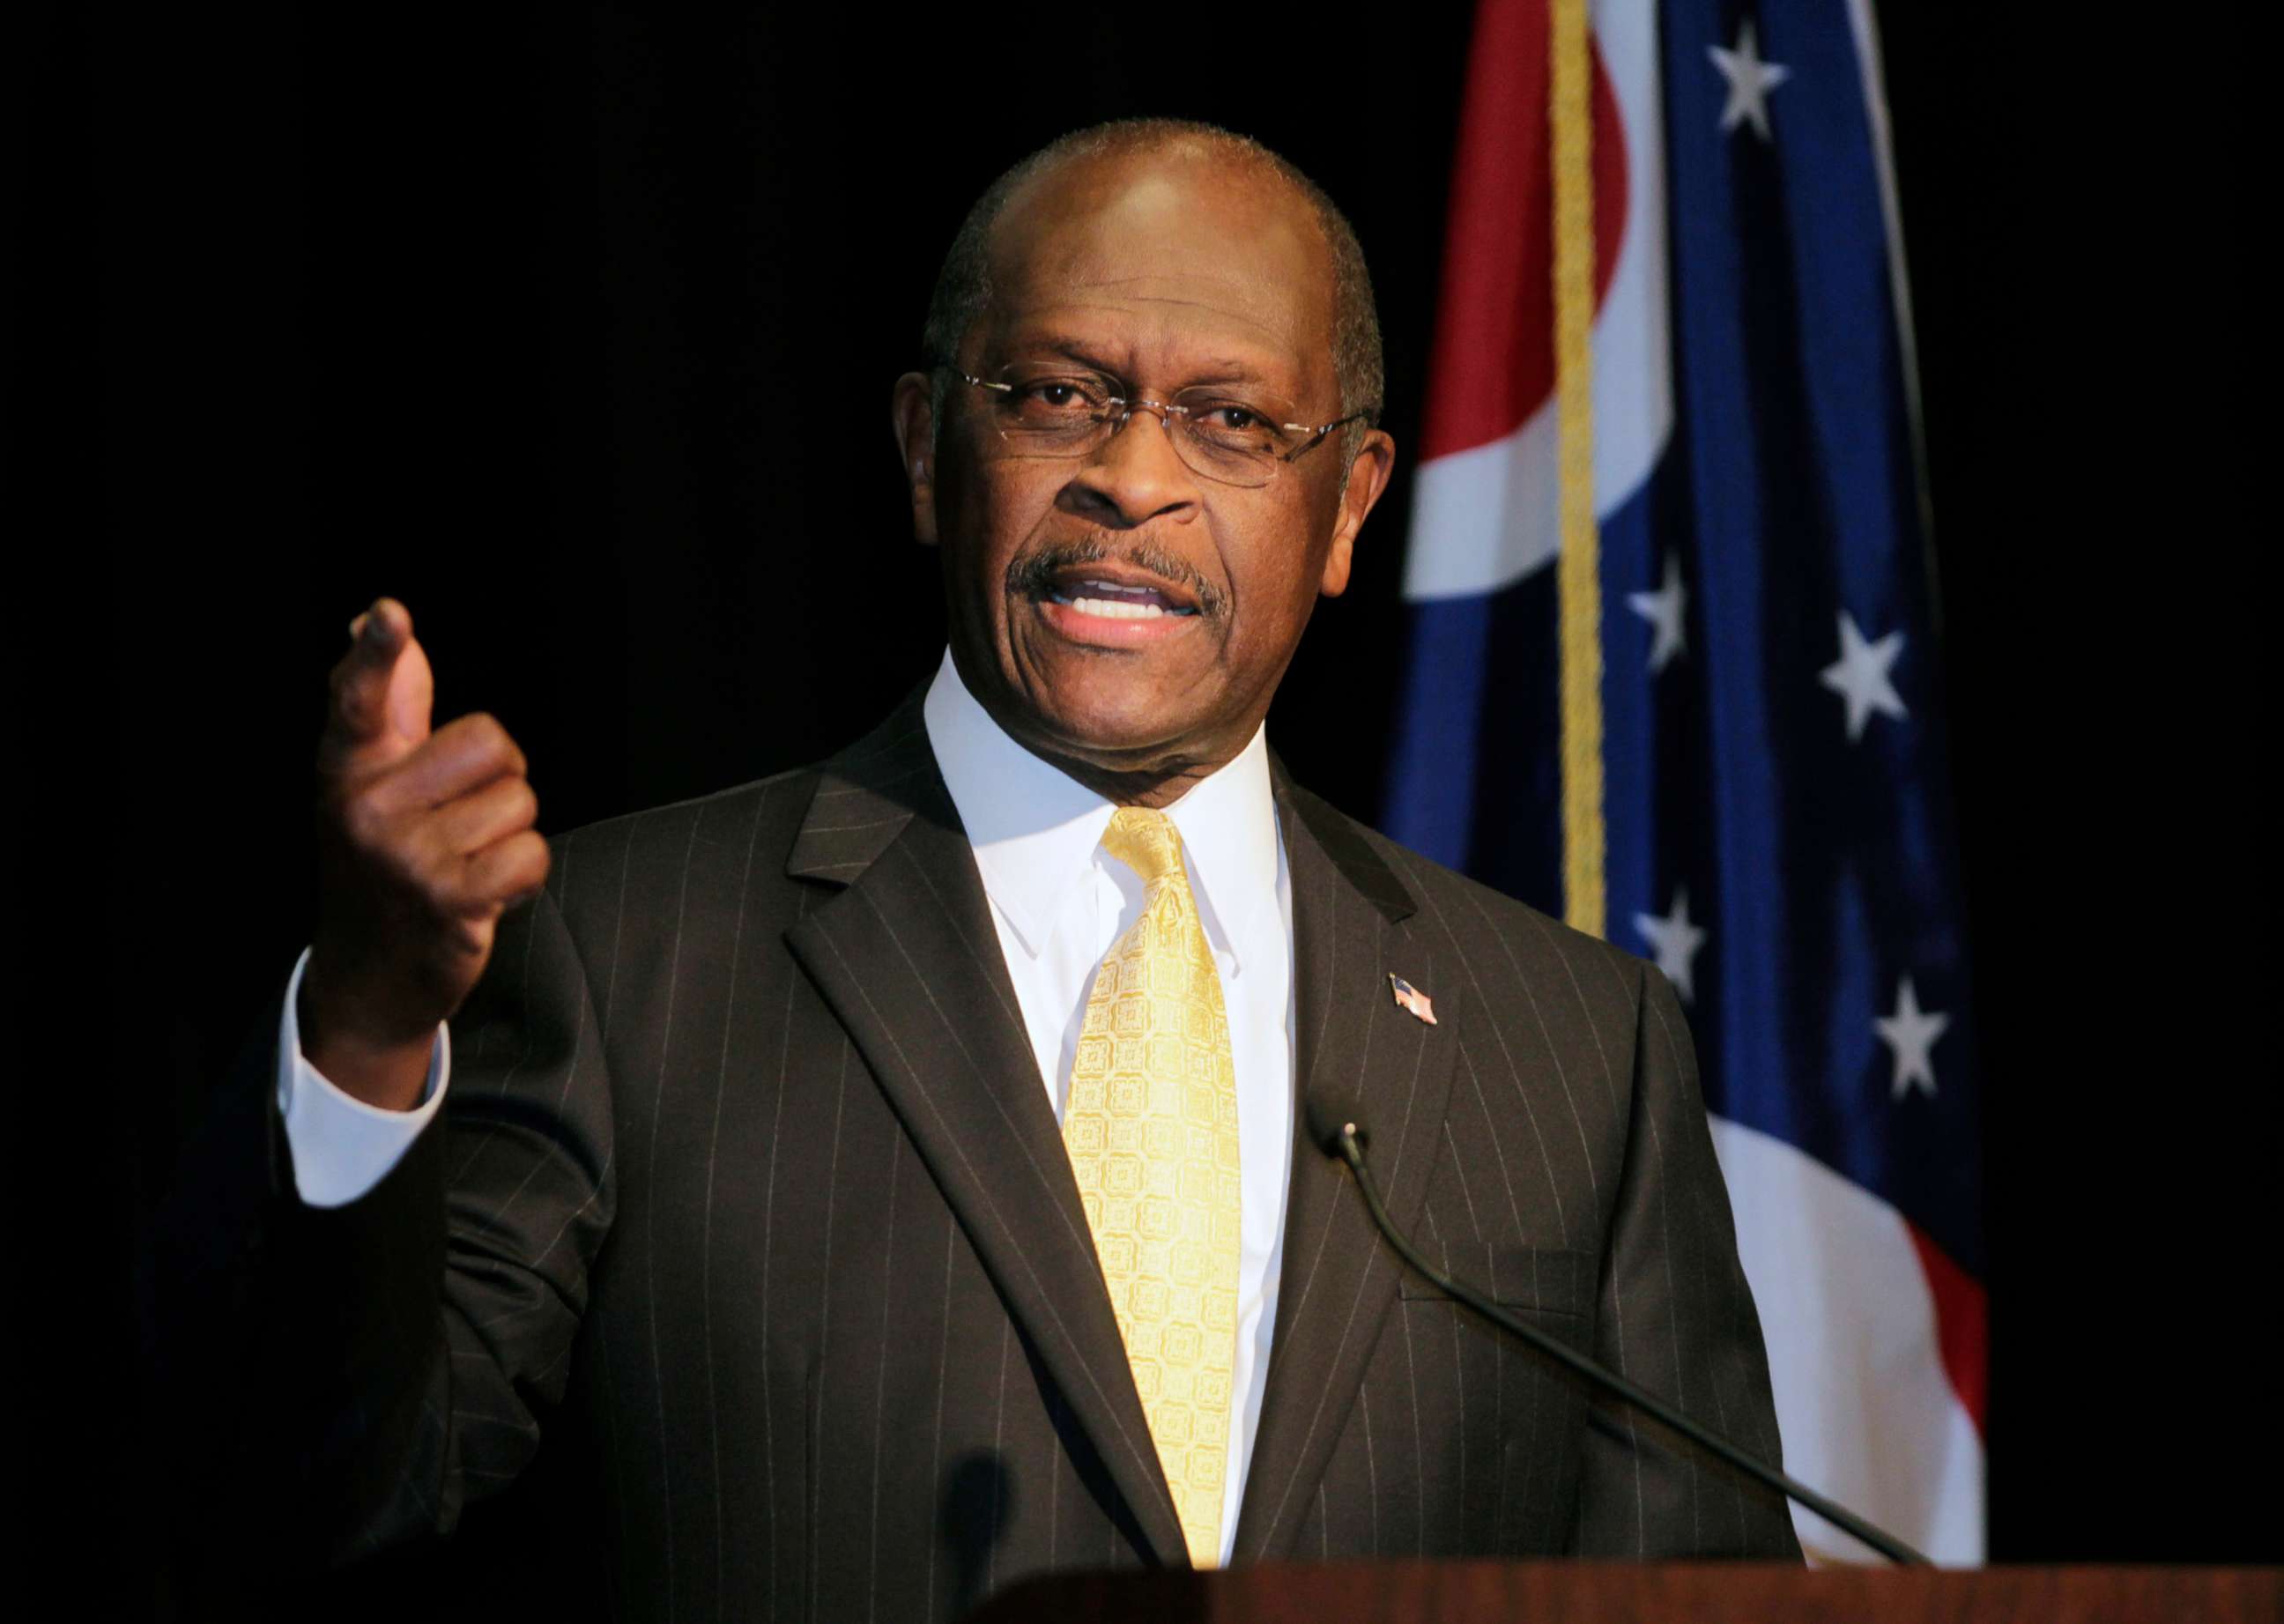 PHOTO: In this Nov. 30, 2011, file photo, Republican presidential contender Herman Cain addresses campaign supporters during a campaign stop in Cincinnati, Ohio.